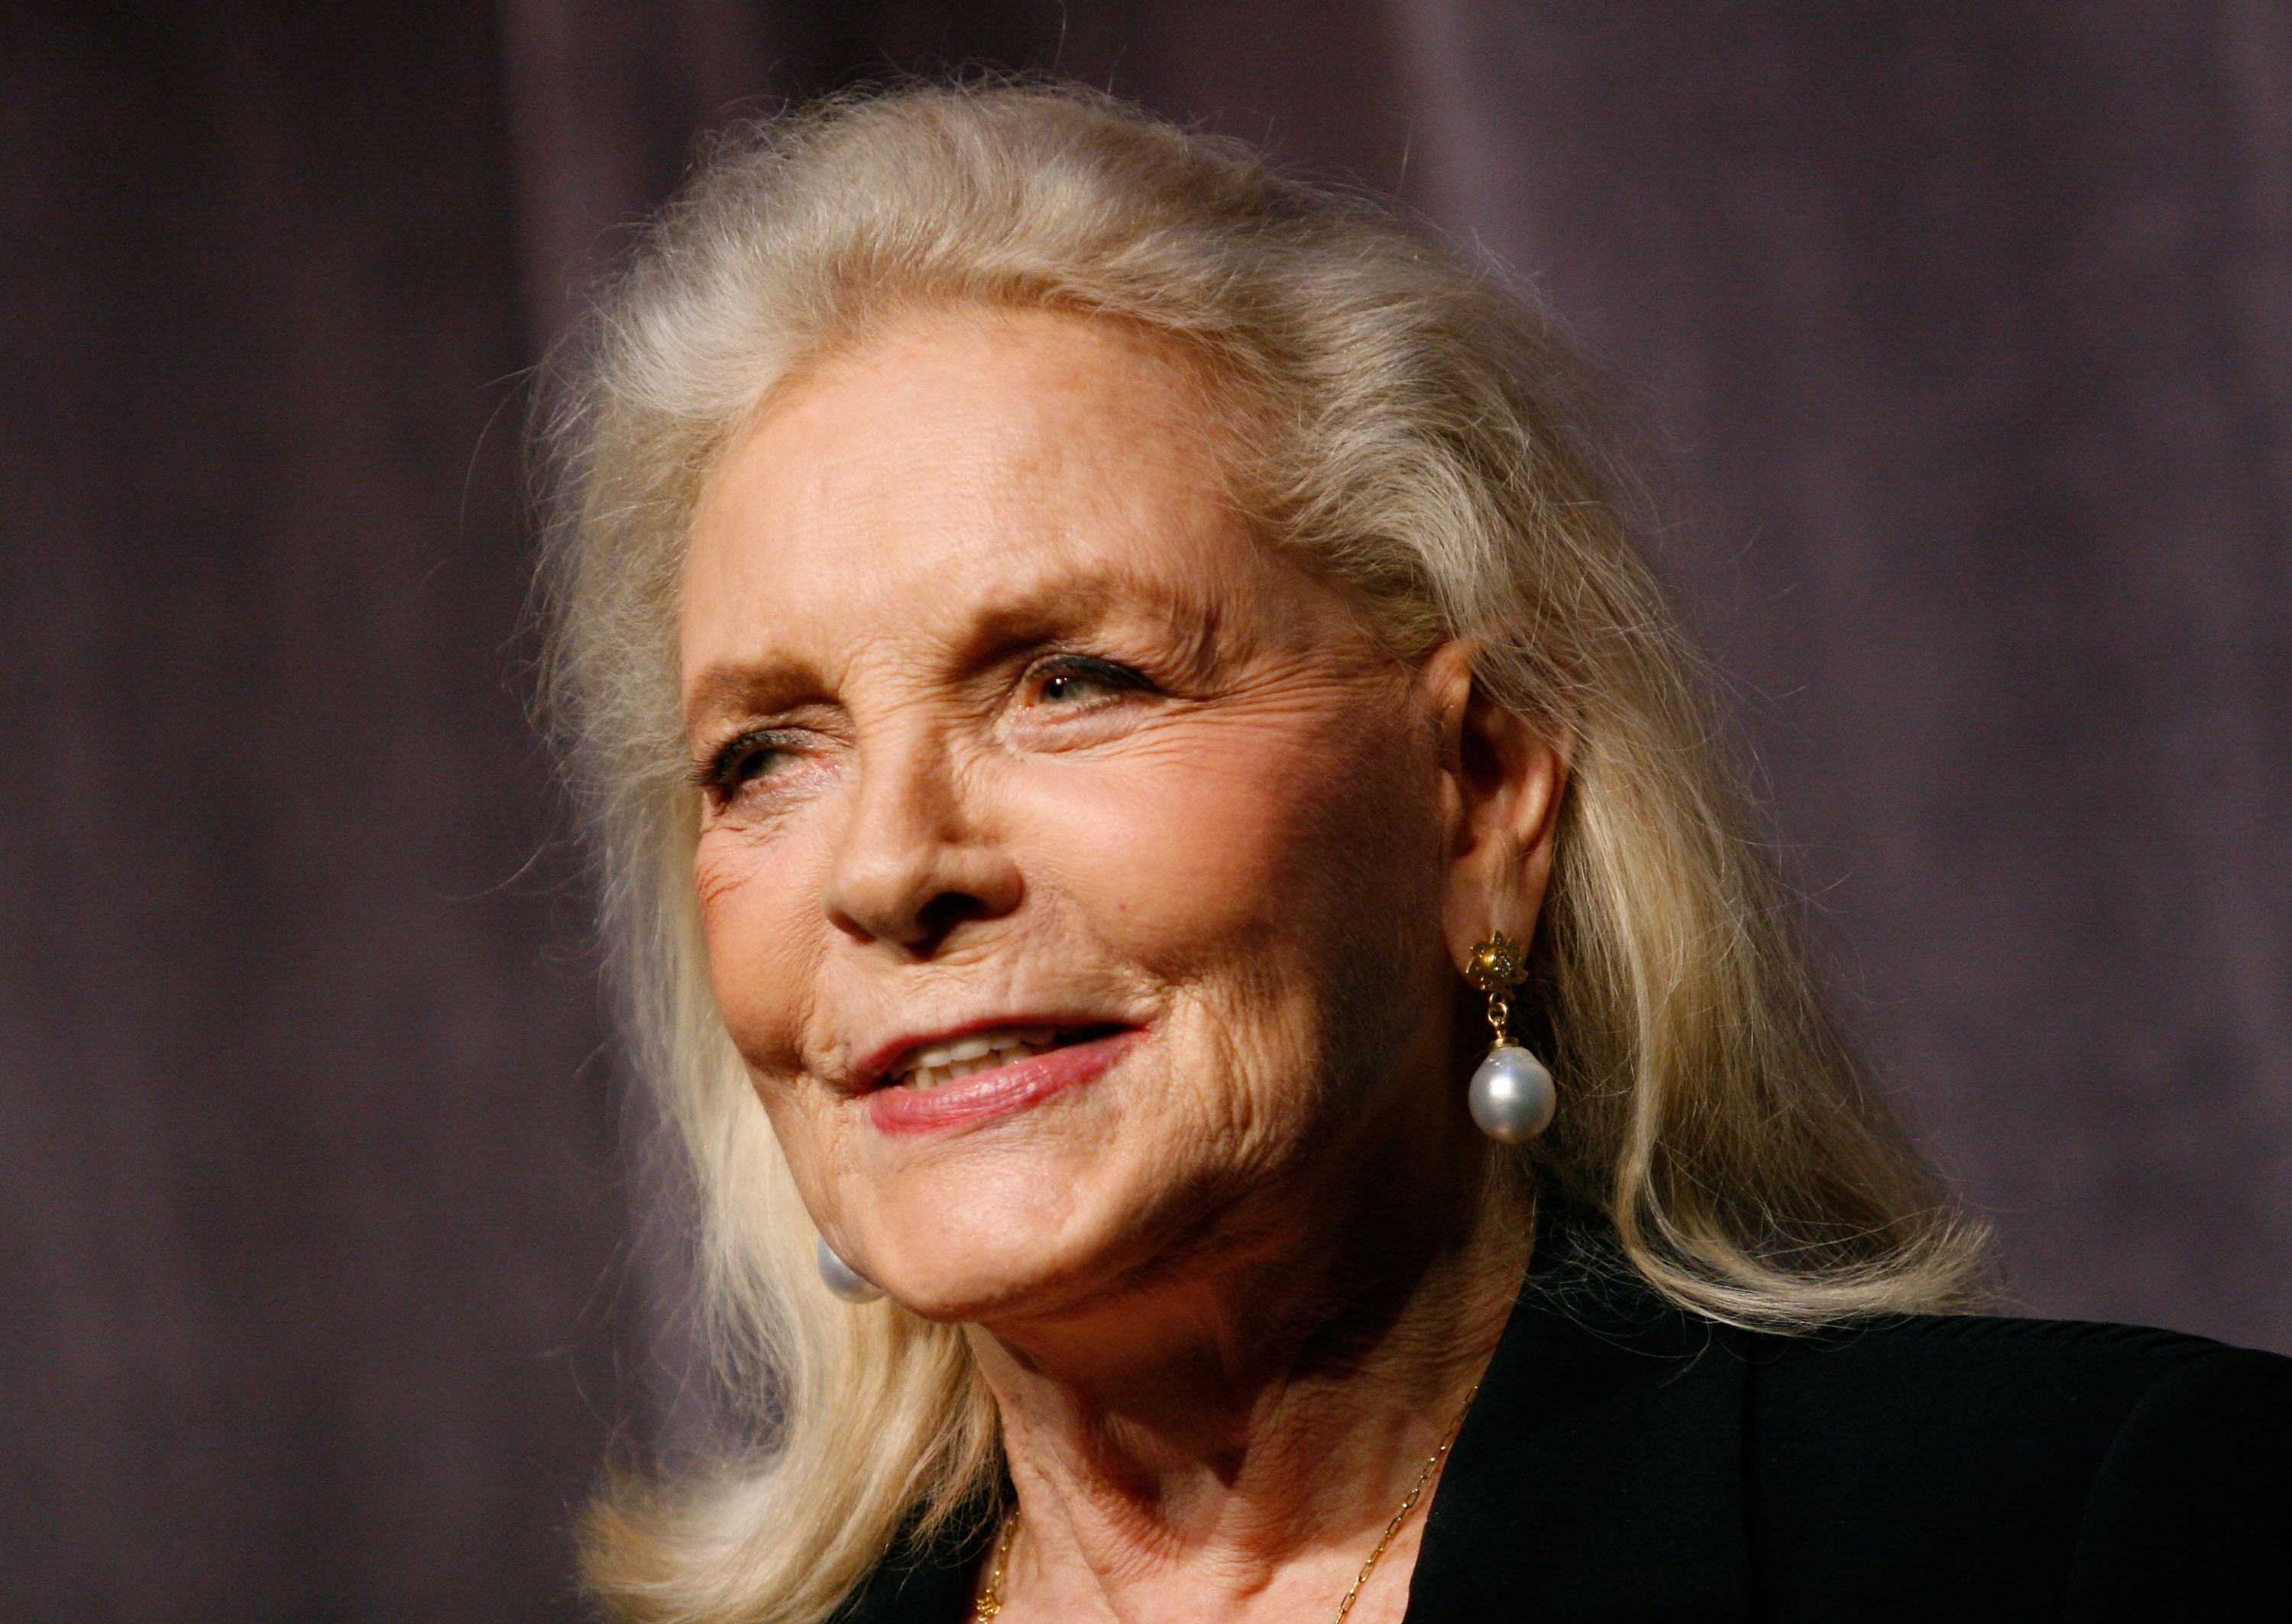 Lauren Bacall at the Roy Thomson Hall on September 13, 2007, in Toronto, Canada. | Source: Getty Images